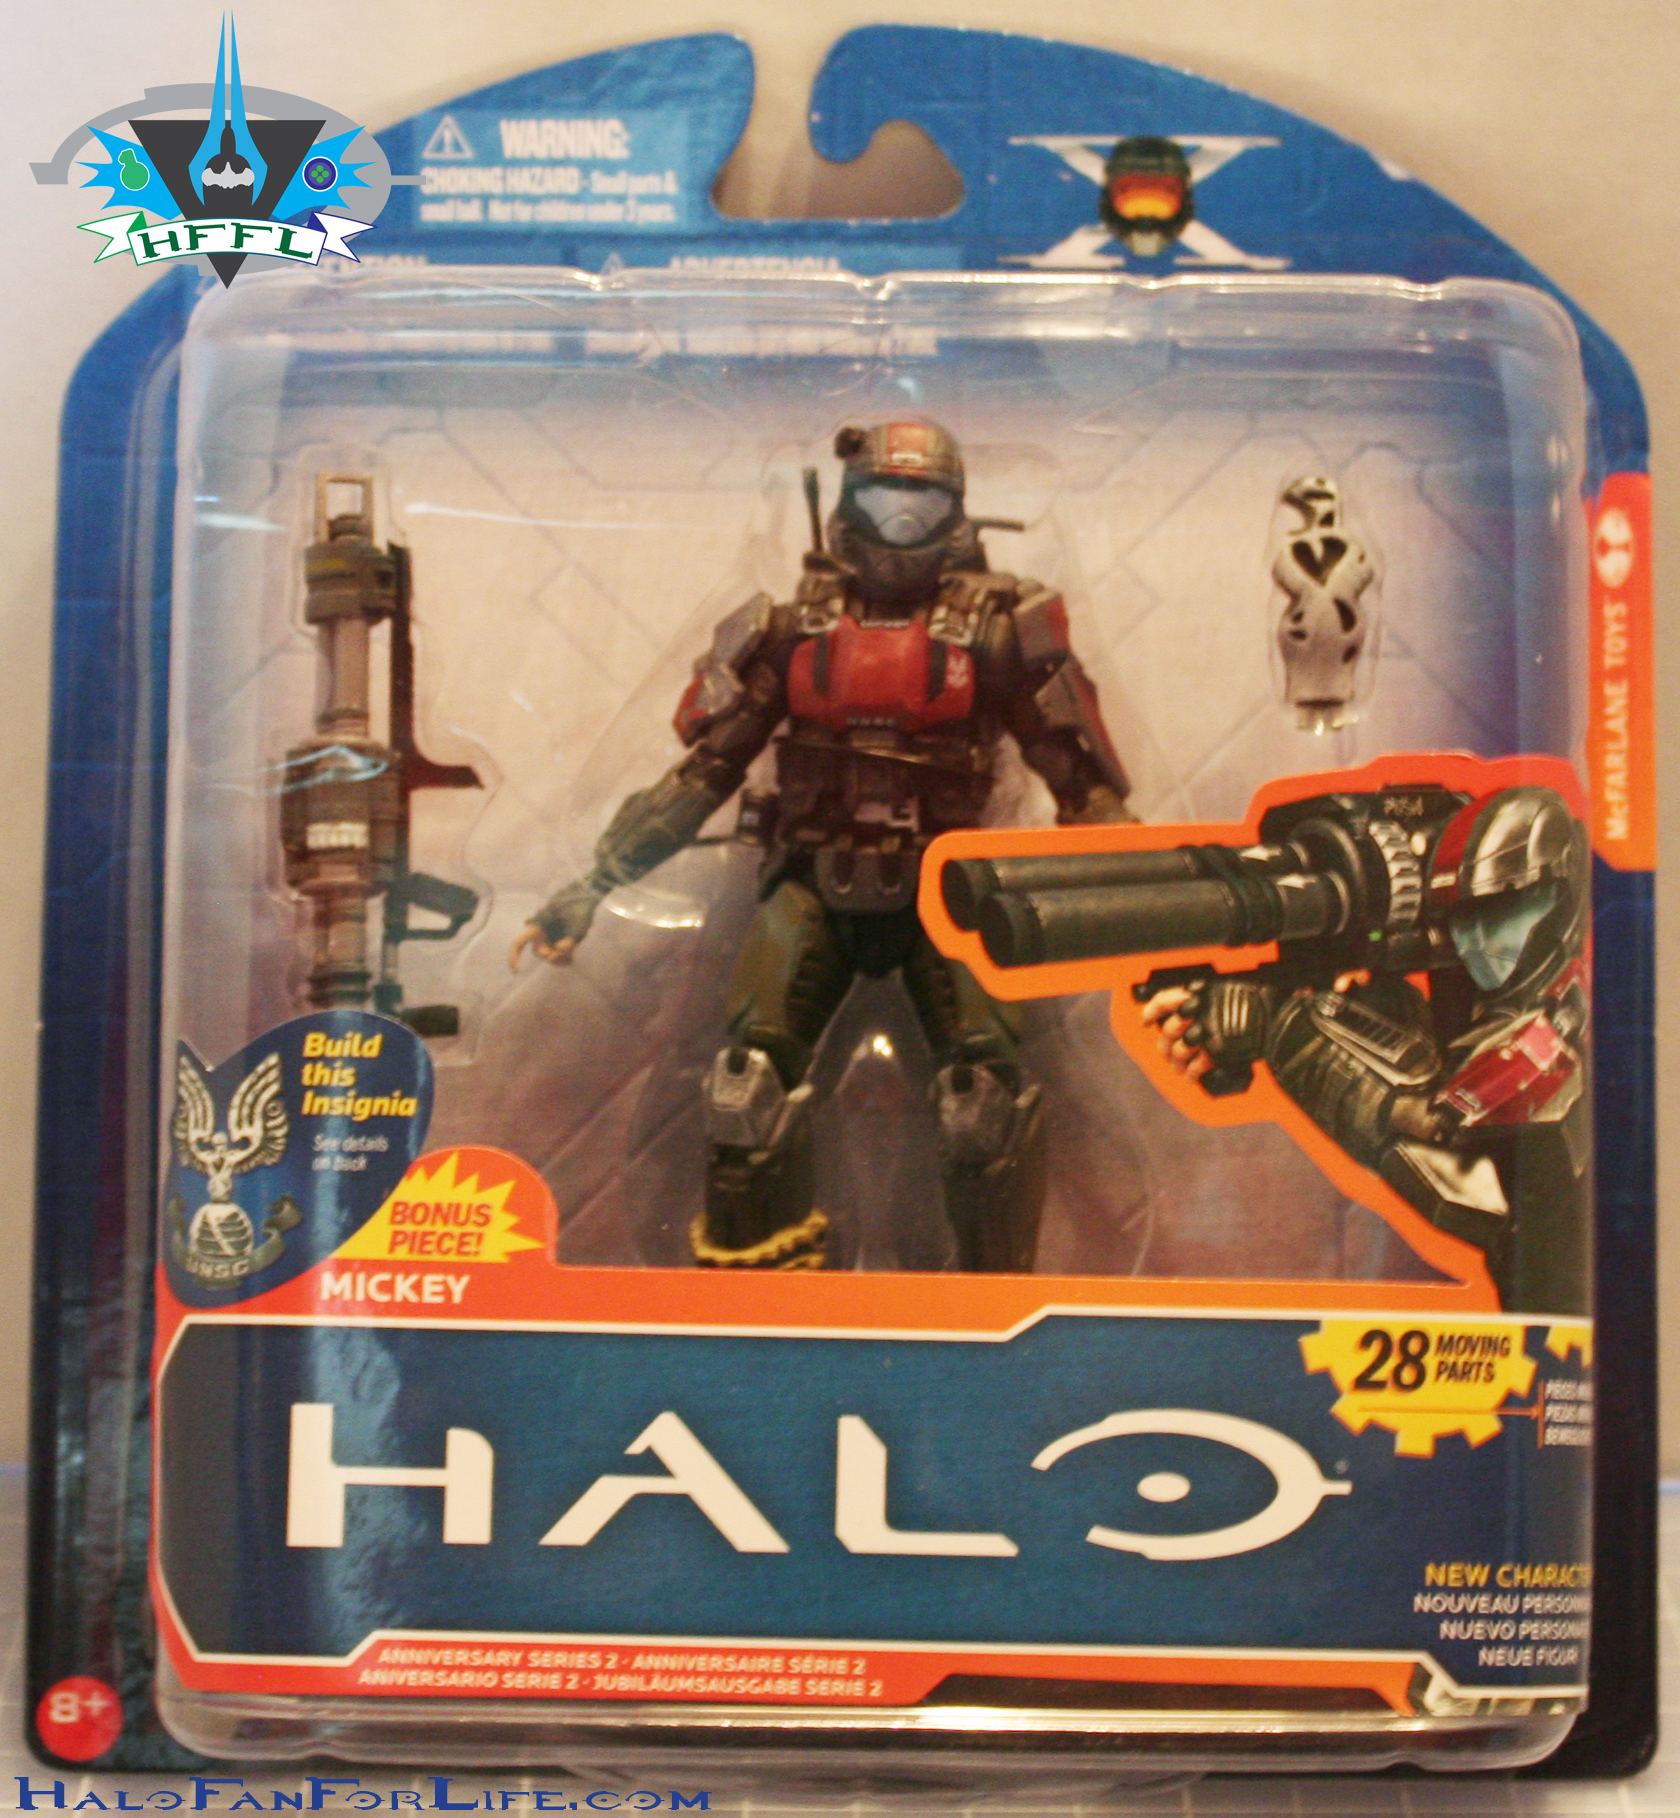 McFarlane Toys Halo Anniversary Series 2 - The Package Master Chief Figure